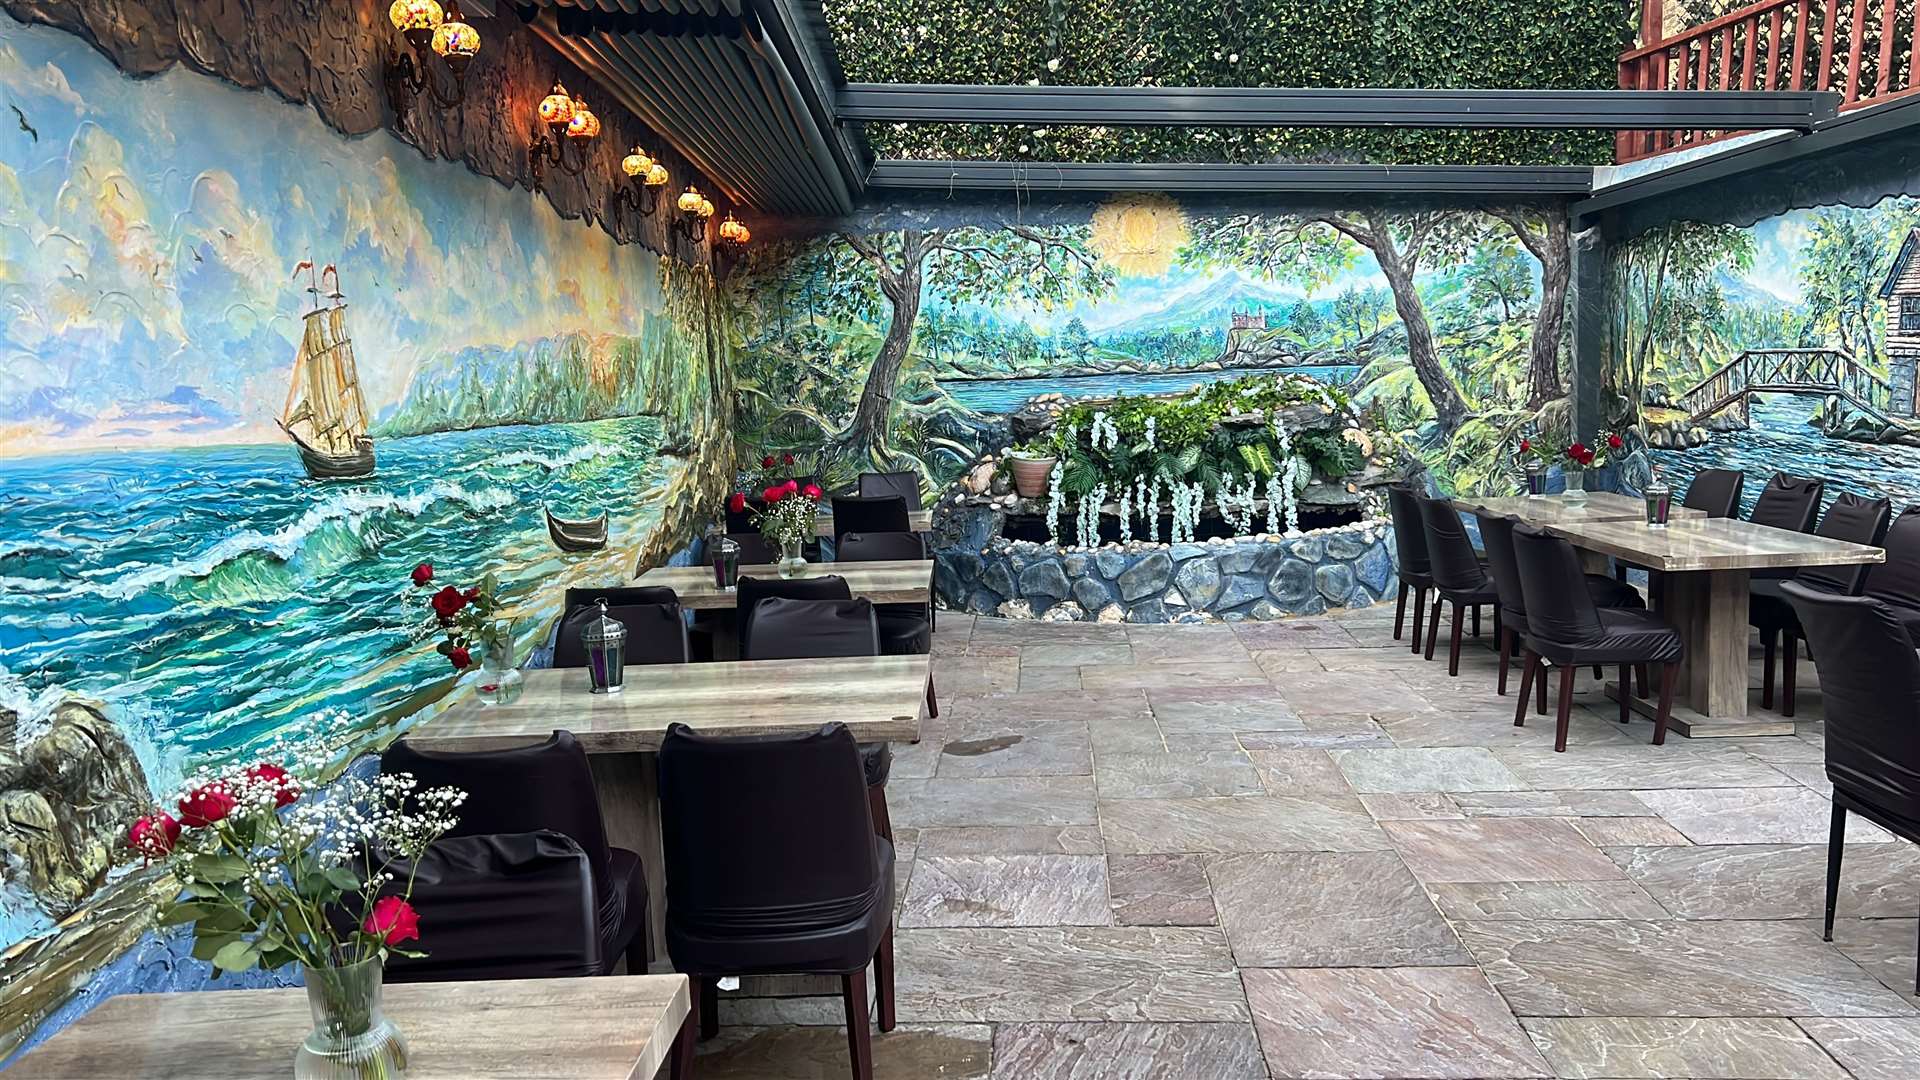 Abdulkadir Rencber, who owns and operates Secret Garden, says the atmosphere of the dining areas sets it apart from other Turkish restaurants. Photo: Abdulkadir Rencber